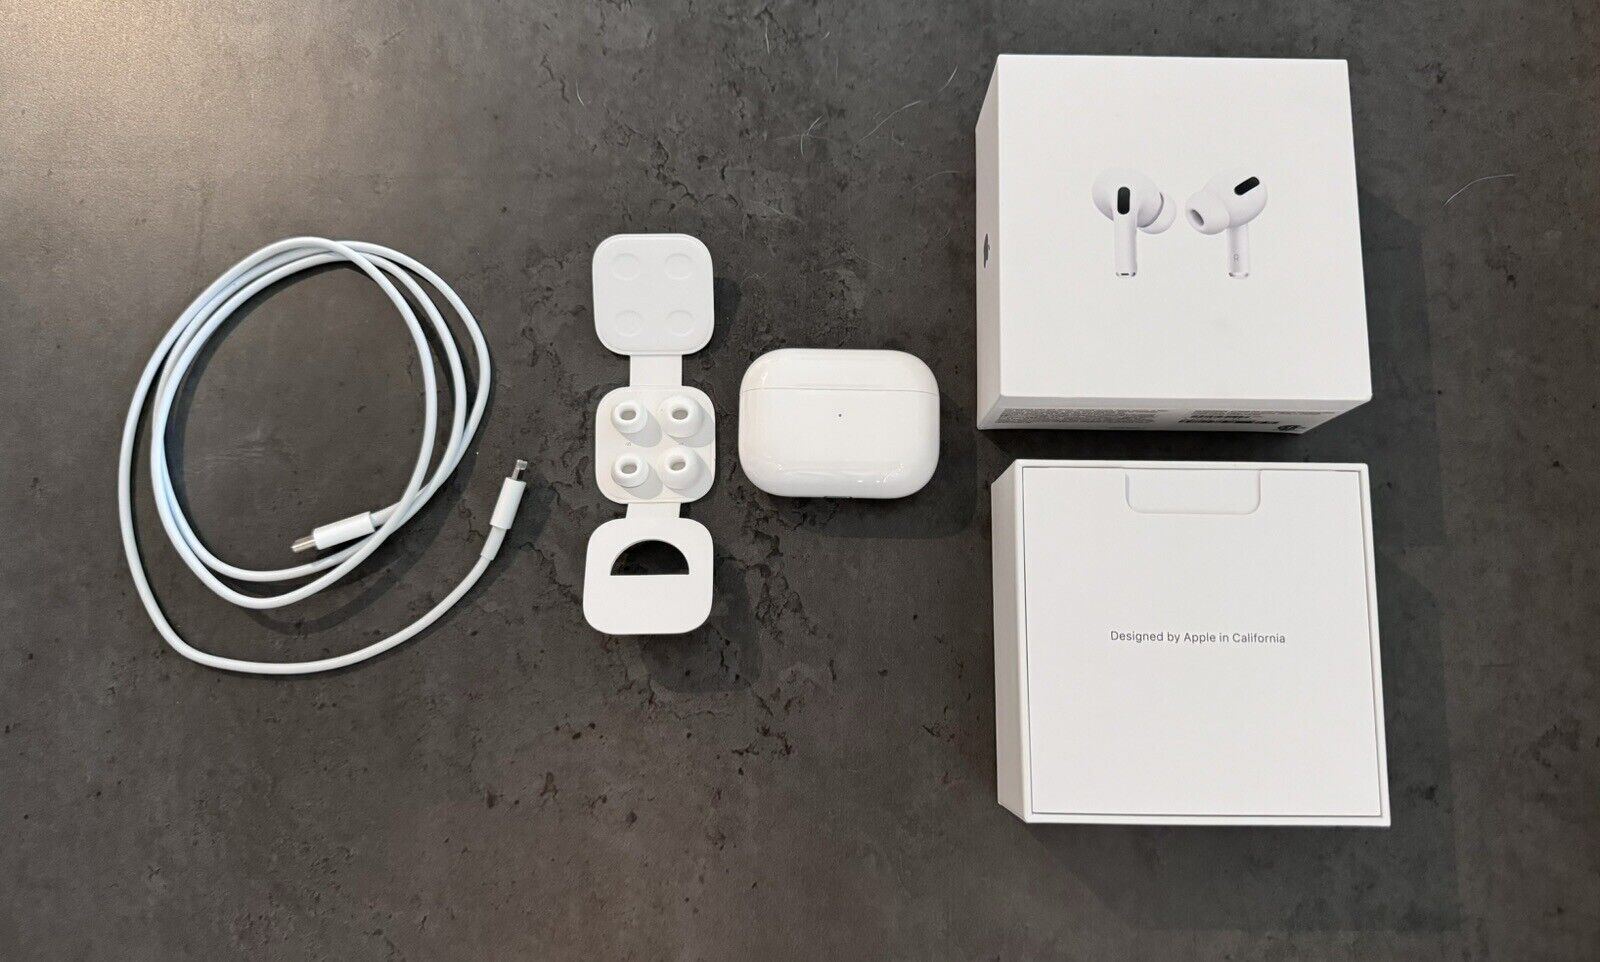 FOR Airpods Pro 1 with Magsafe Wireless Charging Case - White Original & Genuine